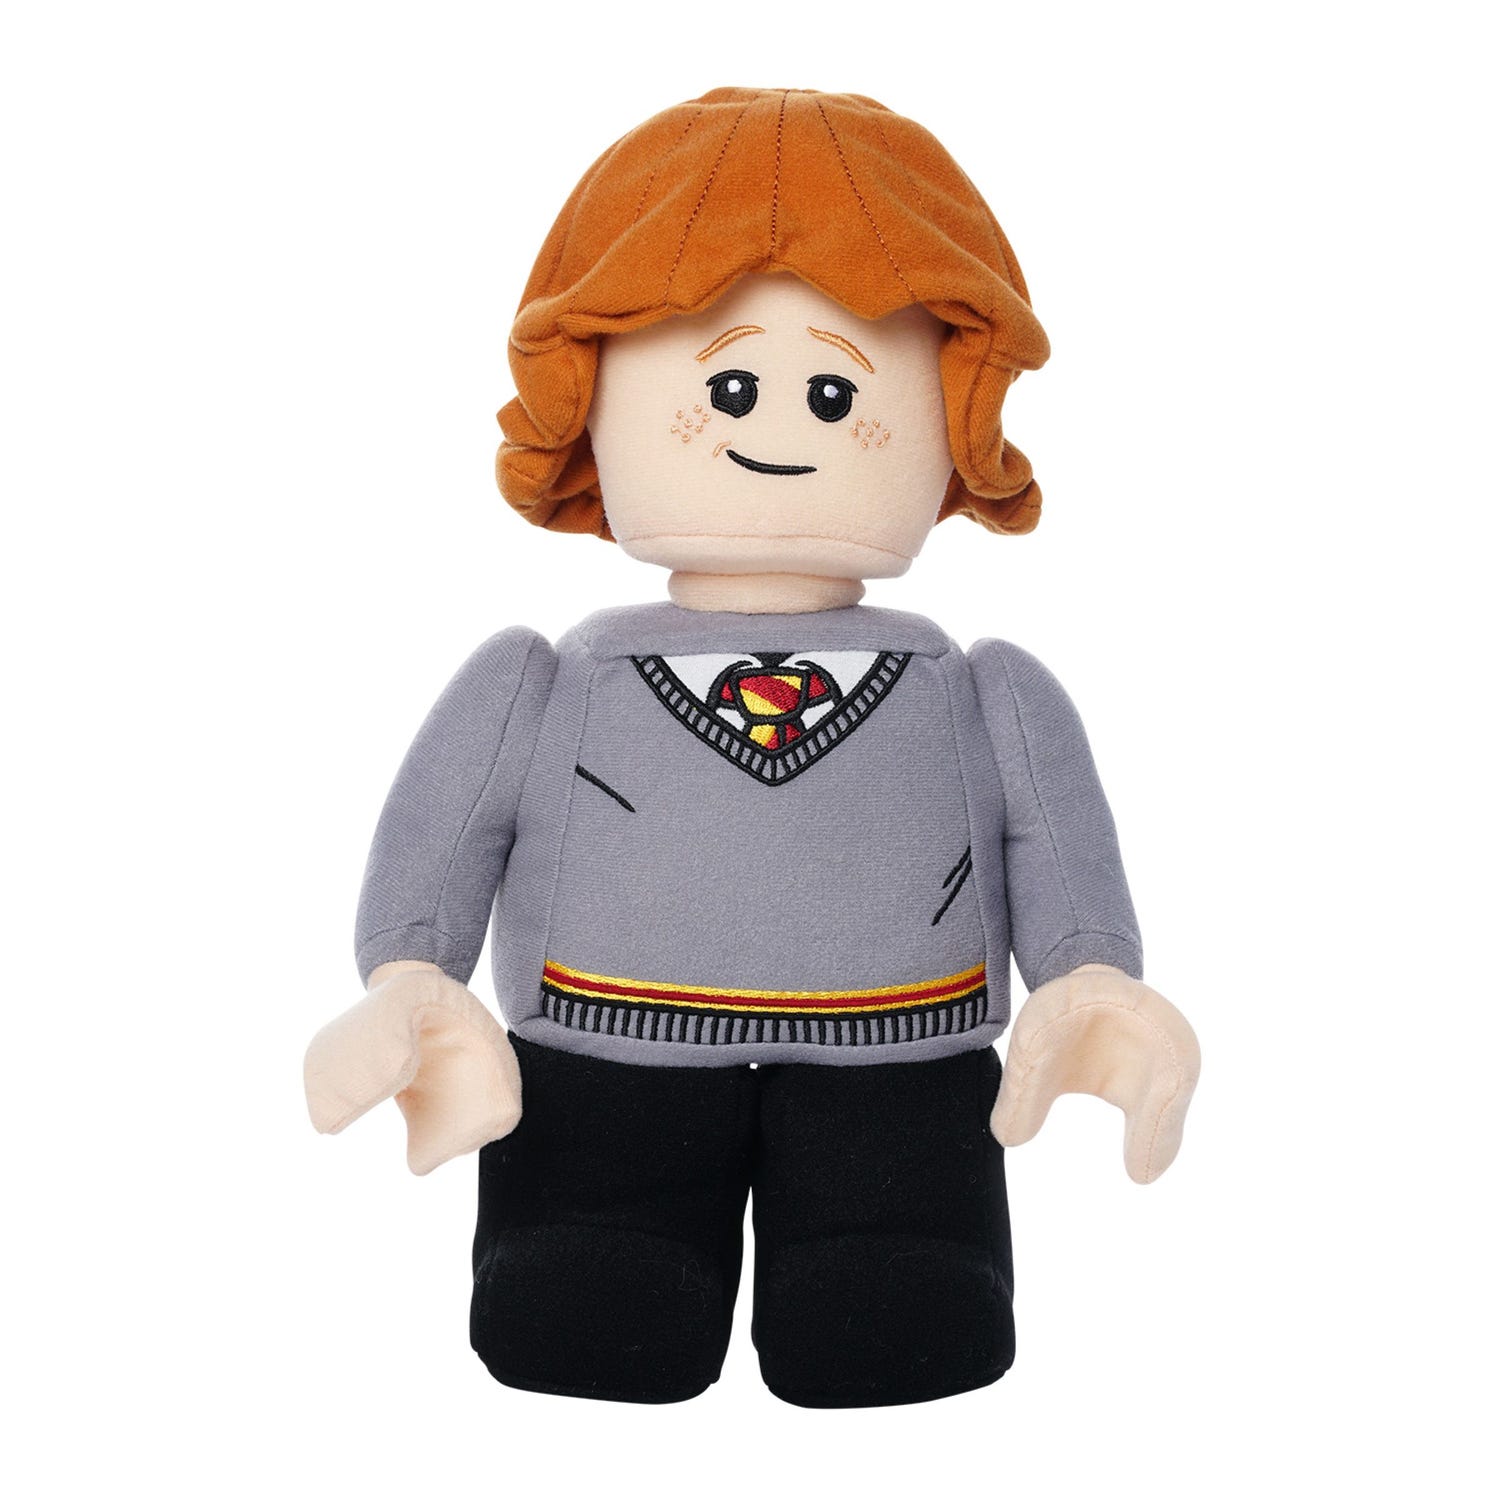 LEGO Harry Potter Mini Figures Harry (child) And Ron Weasley (child) In ...